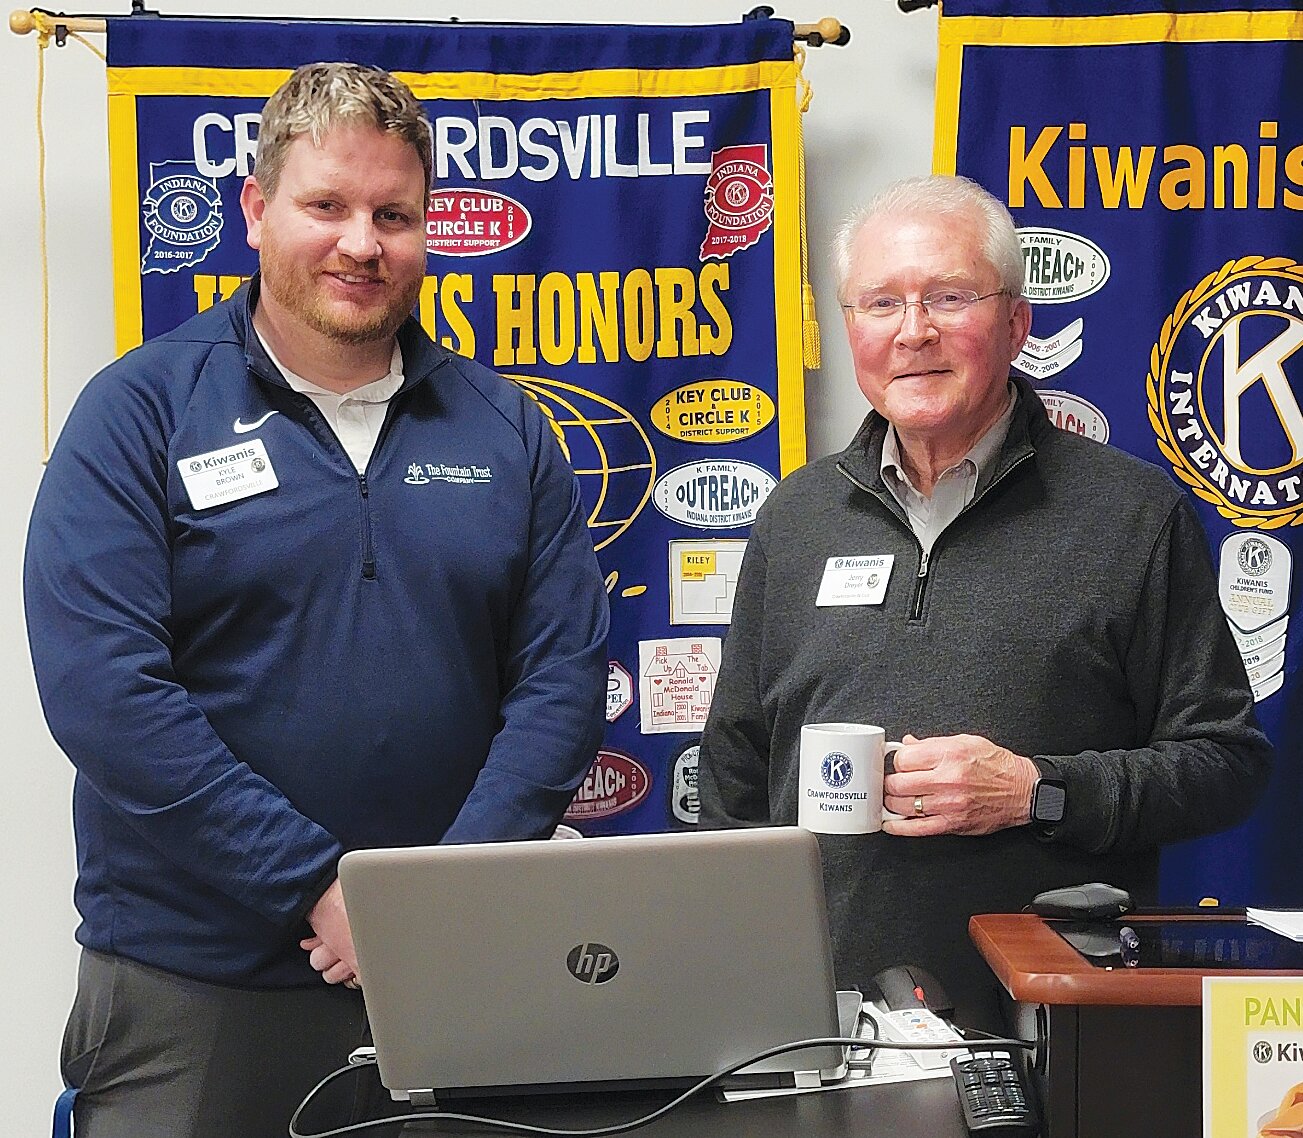 Pictured are Kiwanis Club president Kyle Brown, left, and Jerry Dreyer.